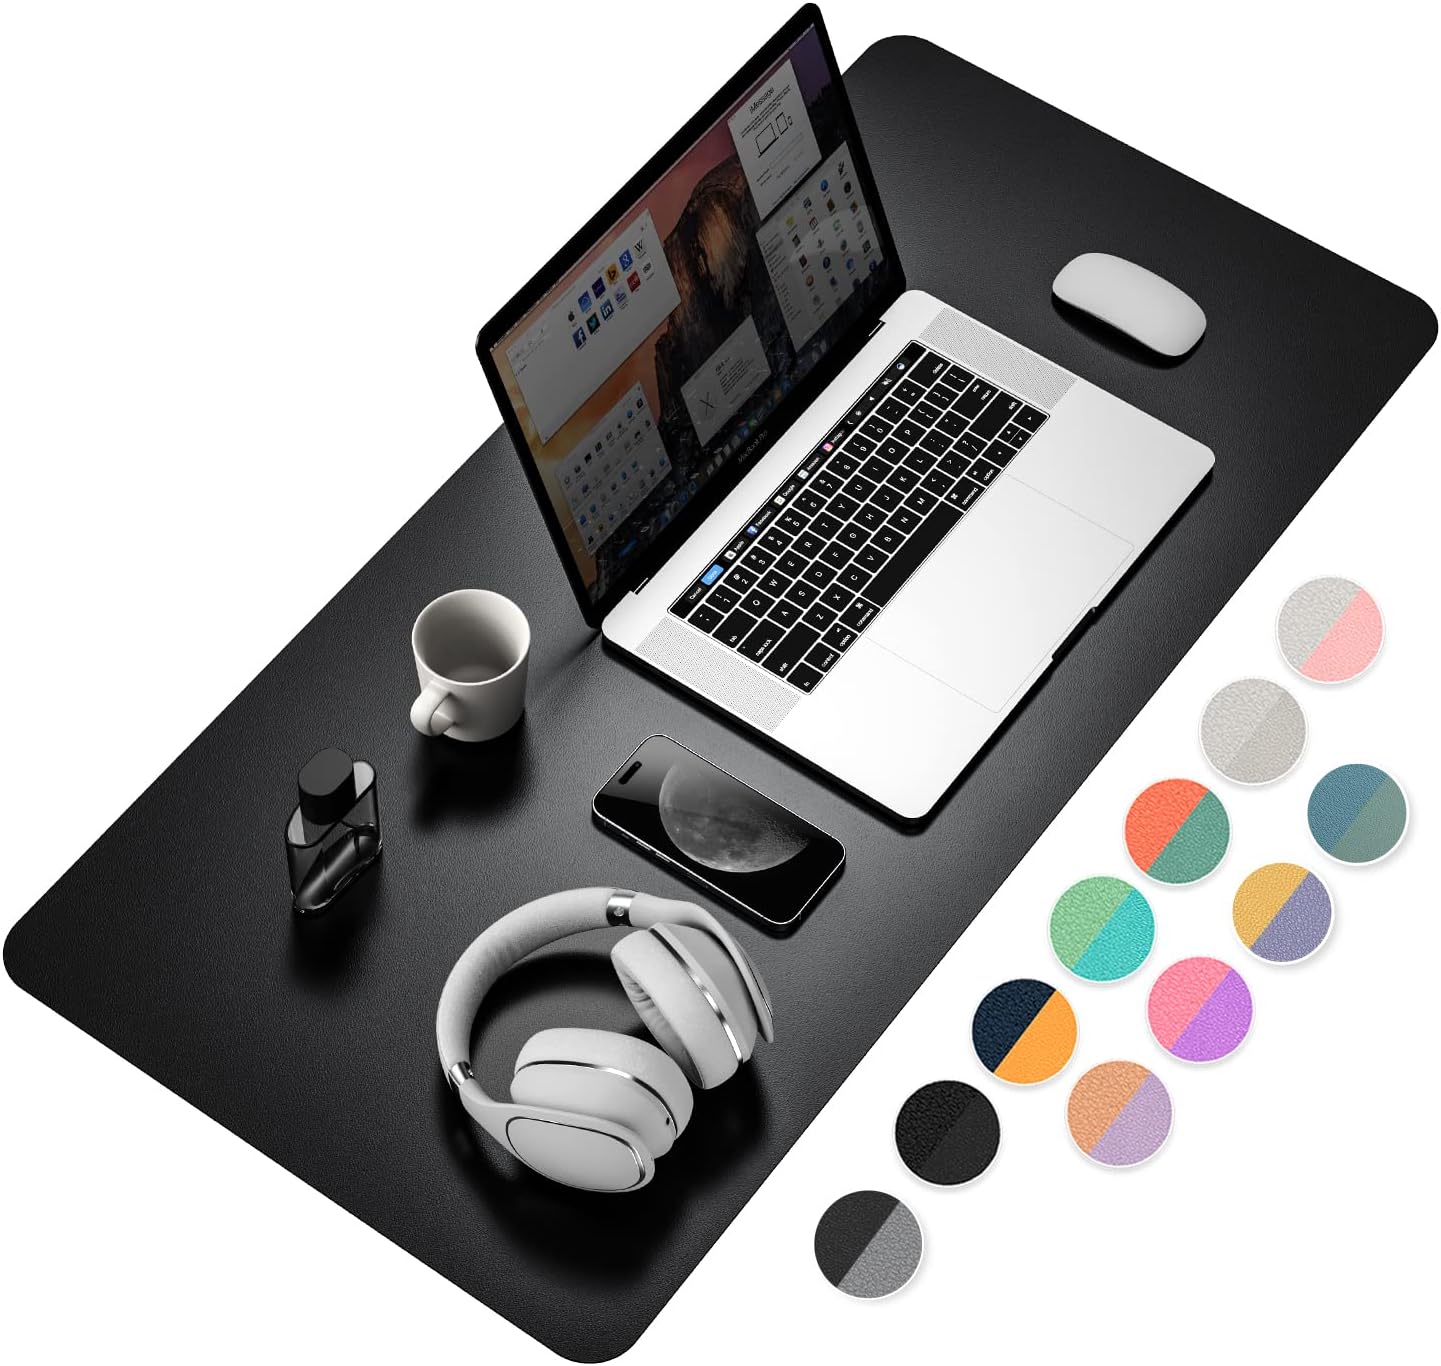 YSAGi Desk Mat, Desk Pad, Waterproof Desk Pad, 35.4" x 17" Laptop Leather Desk Pad Protector, Large Desk Blotter for Keyboard and Mouse, Desk Writing Pad for Office and Home (35.4" x 17", Black+Grey)